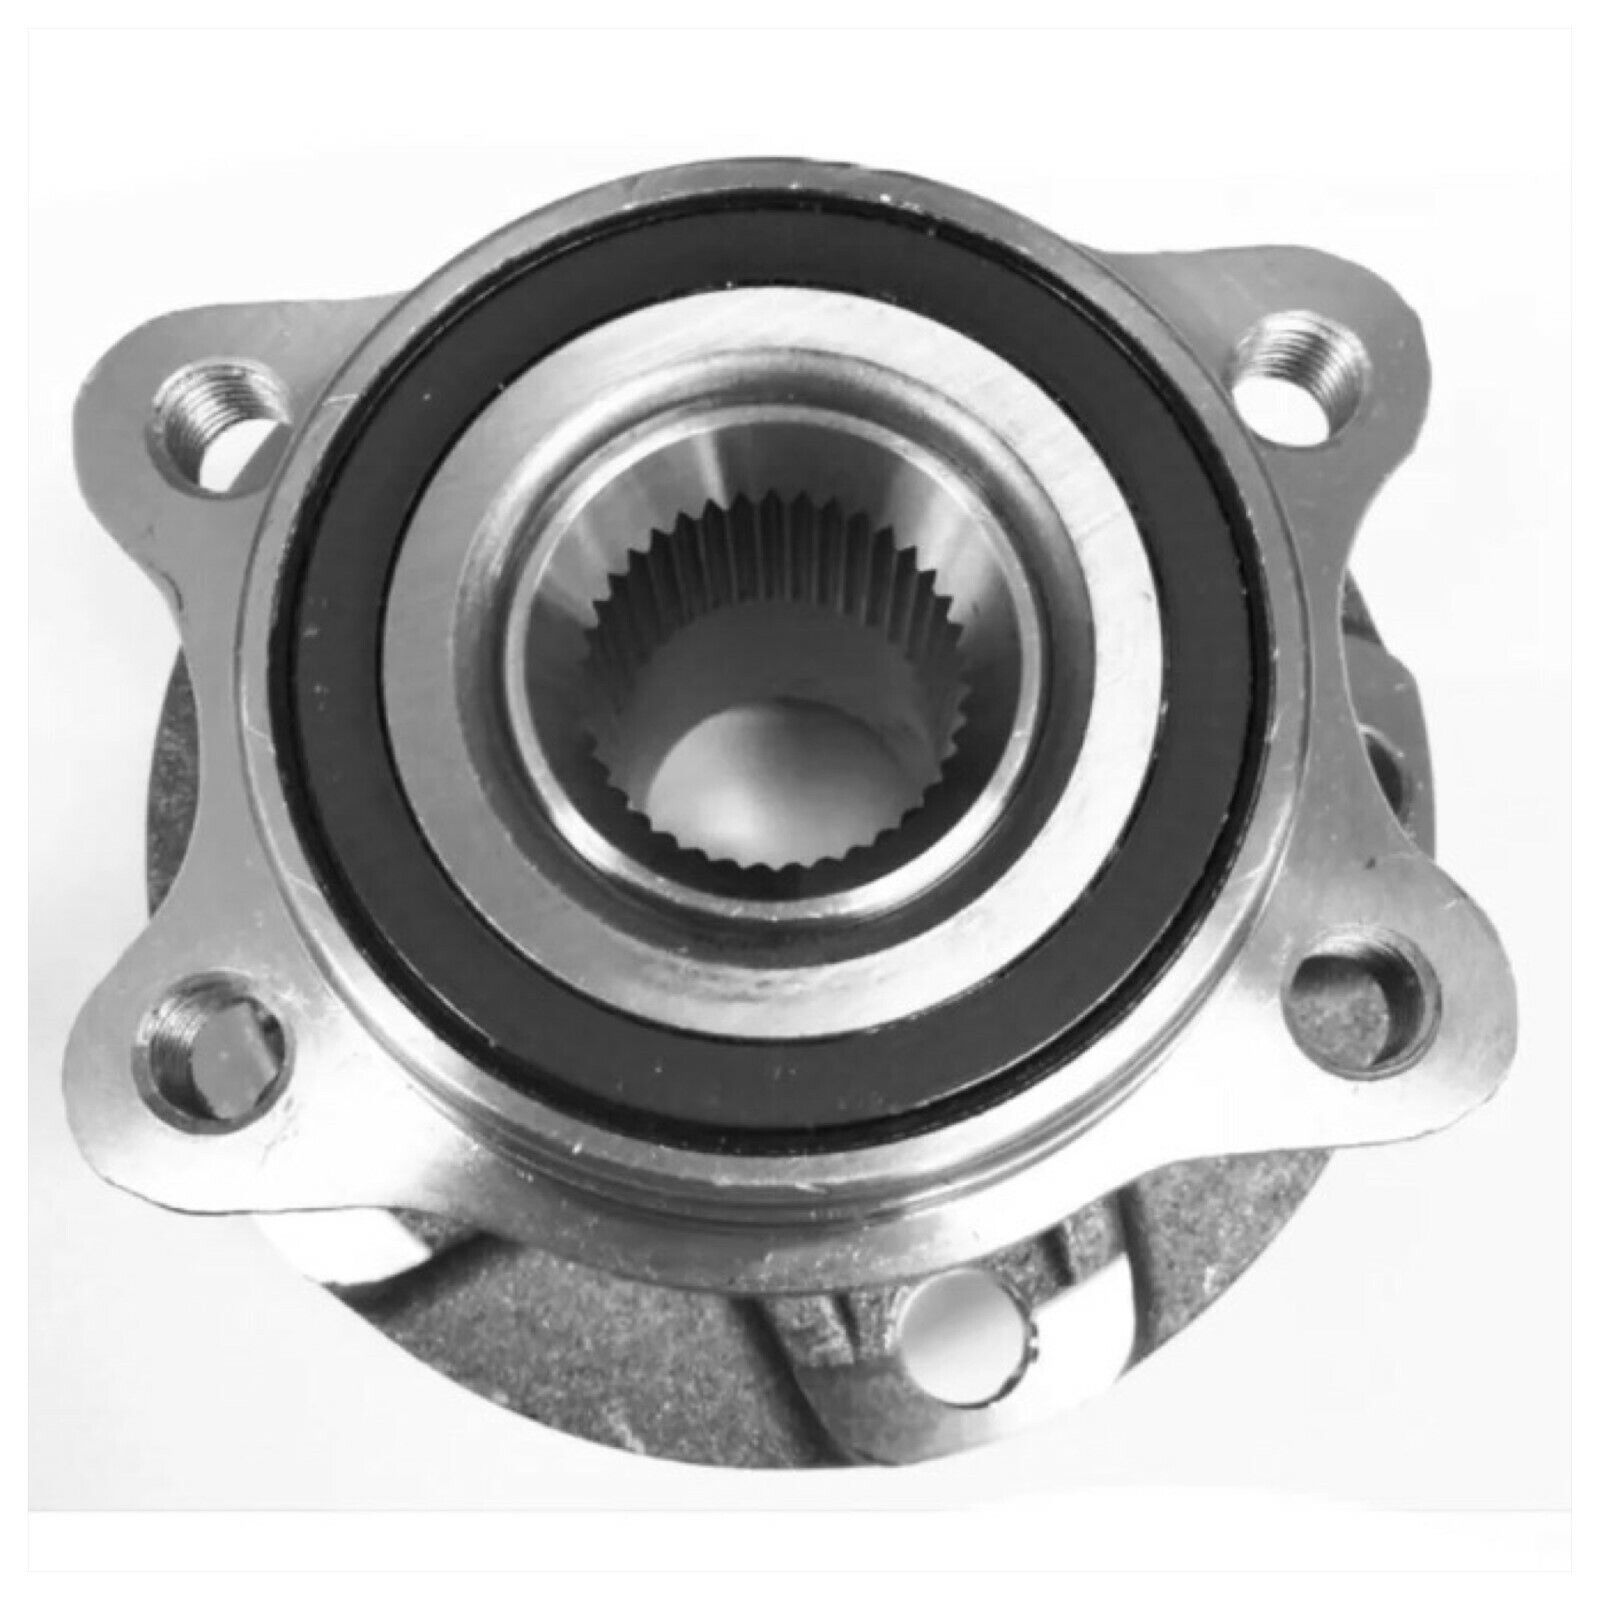 Front Wheel Hub Bearing Assembly For 2006-2011 Audi A6 Quattro V6 Each 584284227